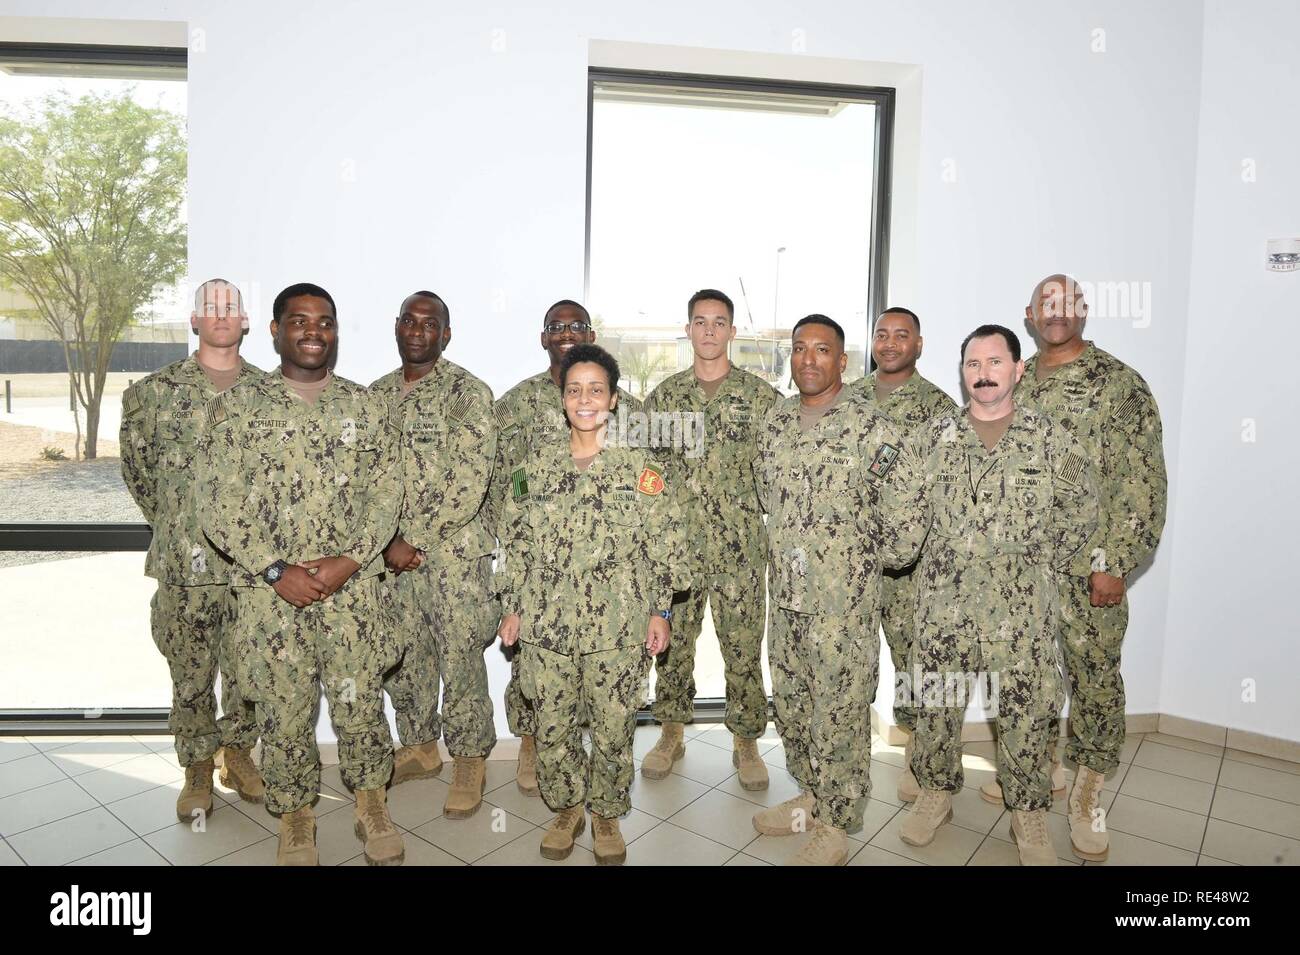 CAMP LEMONNIER (Nov. 21, 2016) Commander, U.S. Naval Forces Europe-Africa /Commander, Allied Joint Force Command Naples, Adm. Michelle Howard, center, and U.S. Naval Forces Europe-Africa Fleet Master Chief Raymond D. Kemp Sr., right rear, meet with Sailor of the Year winners from Coastal Riverine Squadron 11 and Combined Joint Task Force, Horn of Africa Nov. 21, 2016. U.S. Naval Forces Europe-Africa, headquartered in Naples, Italy, oversees joint and naval operations, often in concert with allied, joint, and interagency partners, to enable enduring relationships, and increase vigilance and res Stock Photo